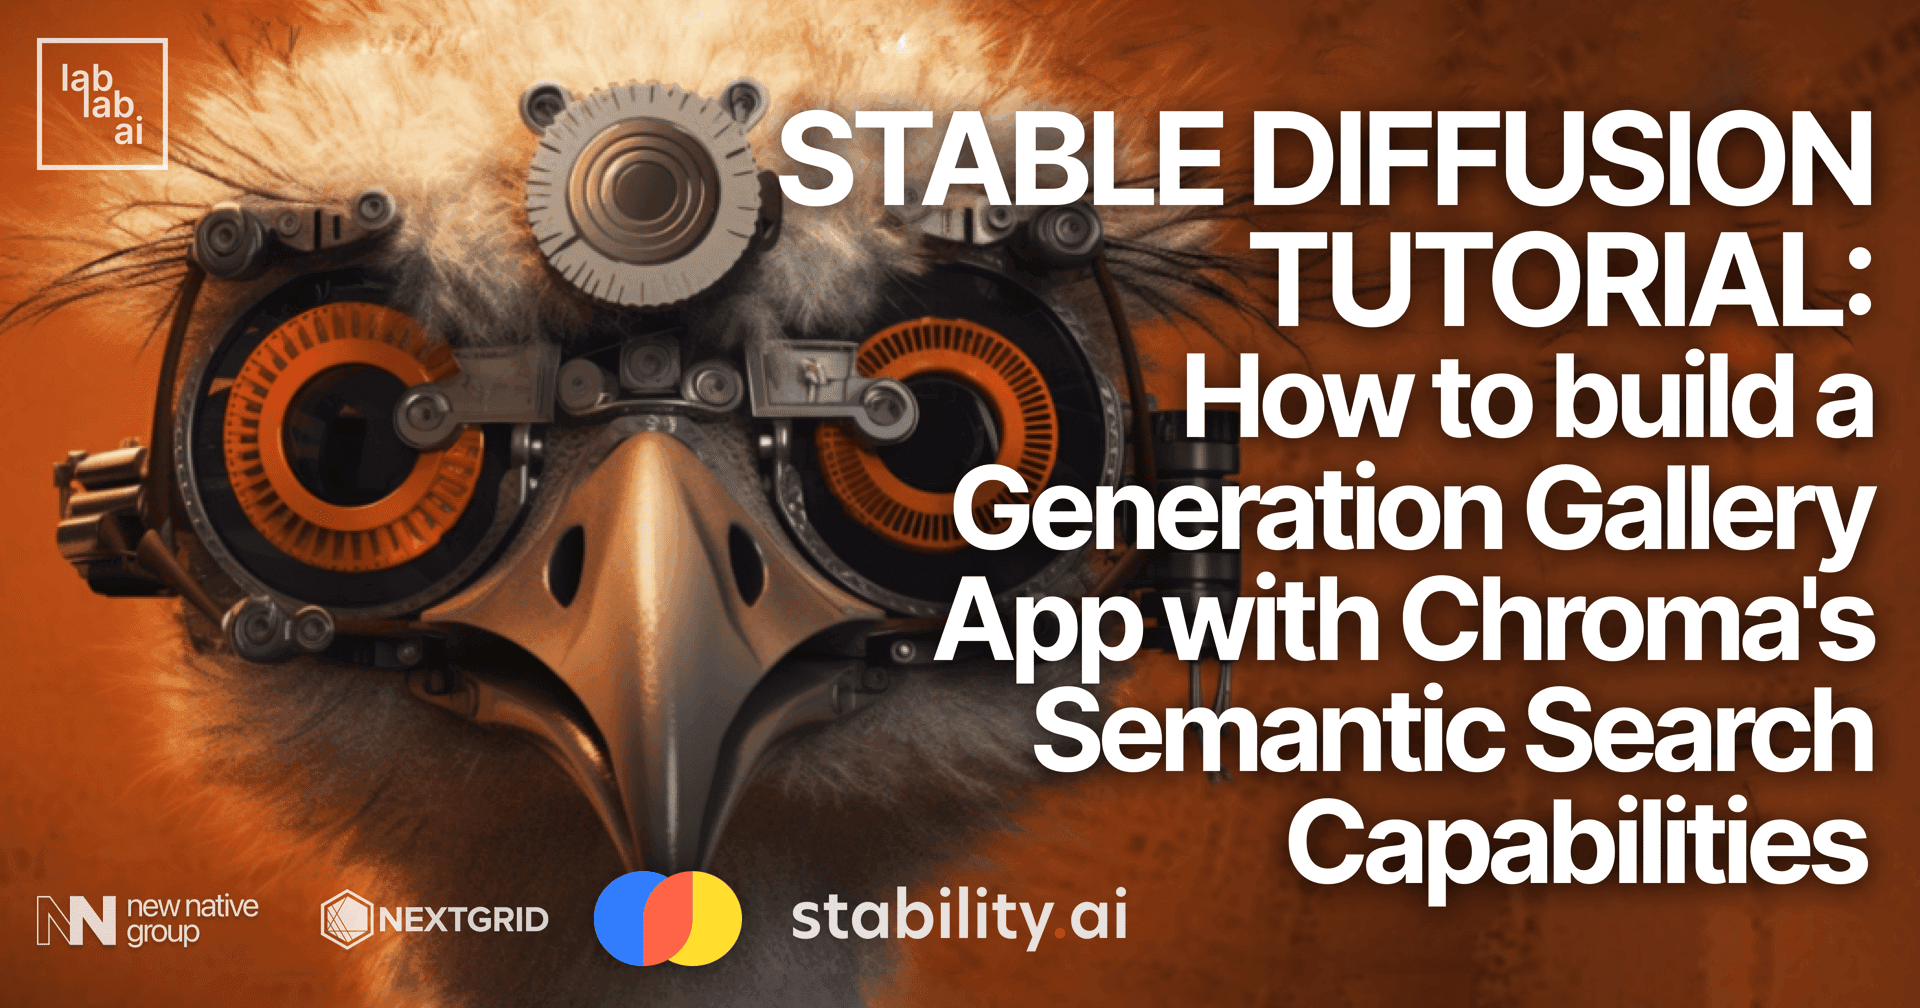 Stable Diffusion tutorial: How to build a Generation Gallery App with Chroma's Semantic Search Capabilities